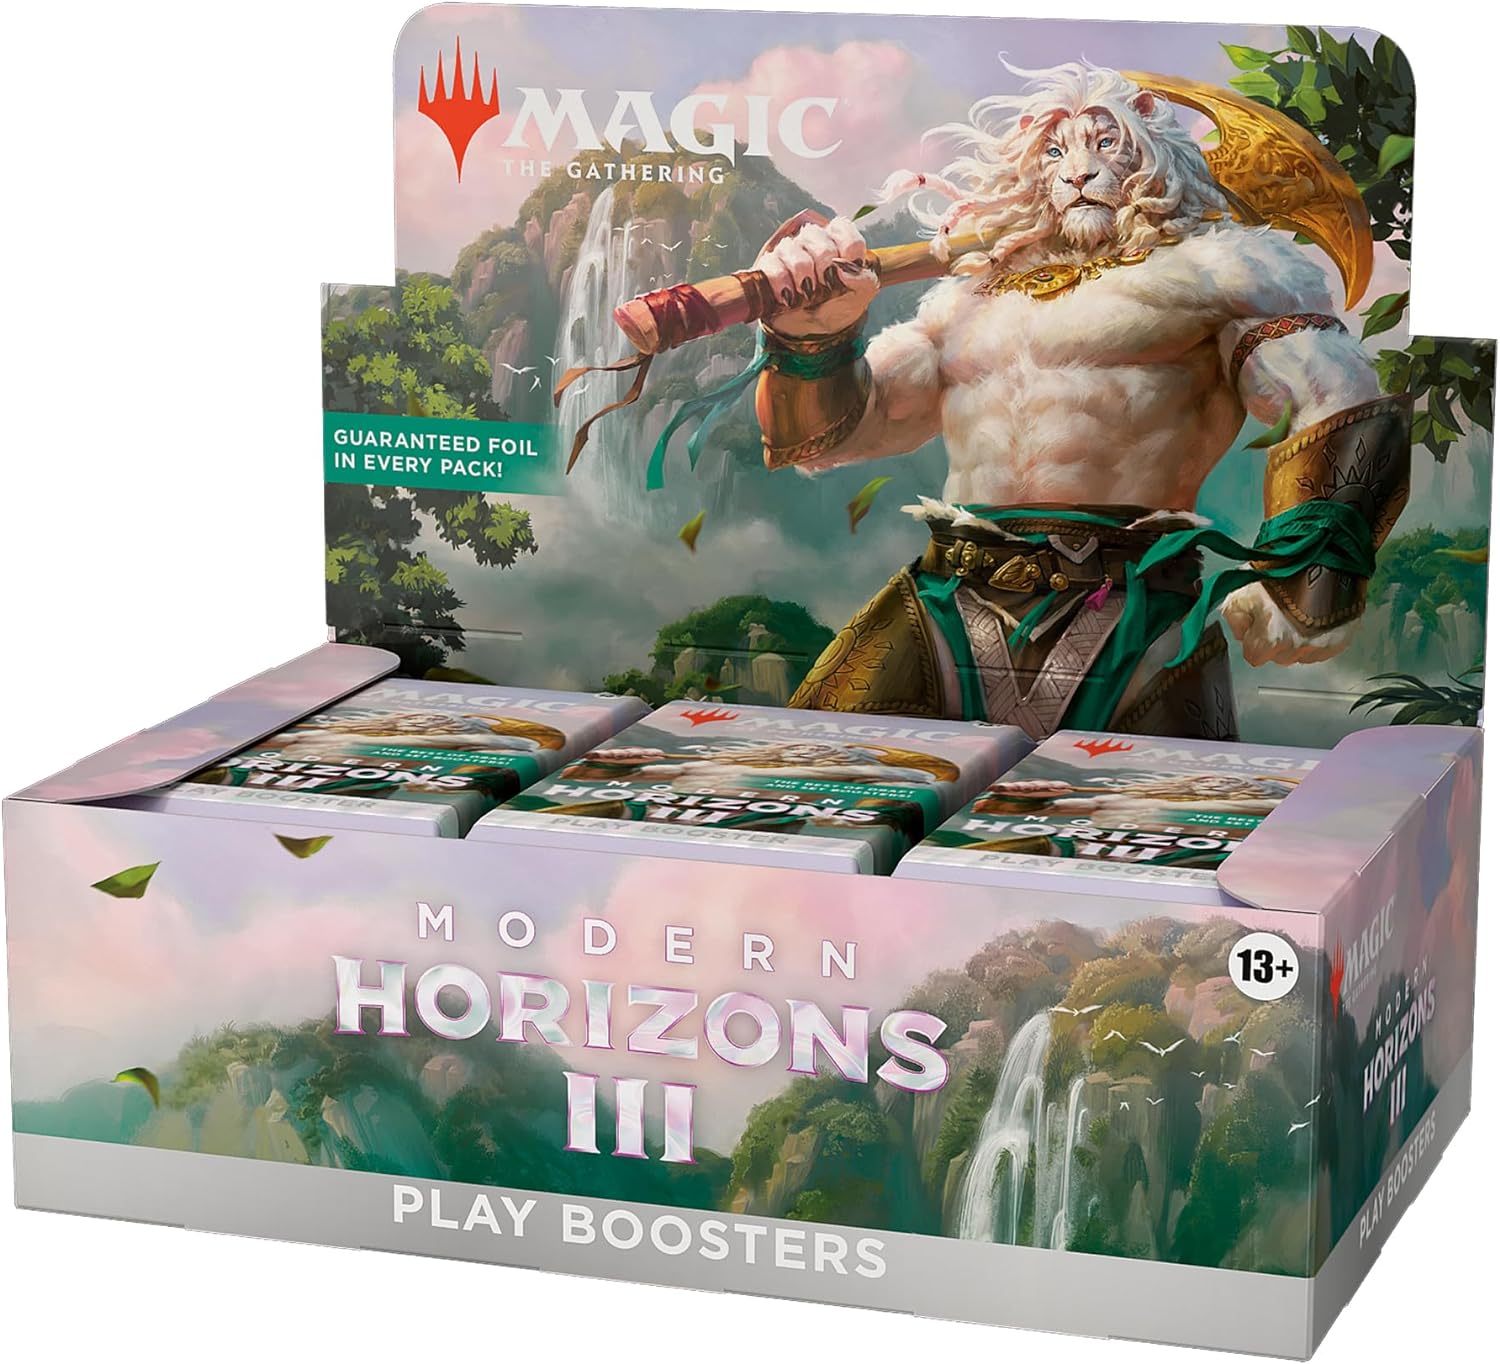 PRE-ORDER: Modern Horizons 3 Play Booster Box - 36 Packs, Trading Cards made by Magic The Gathering. Exit 23 Games 